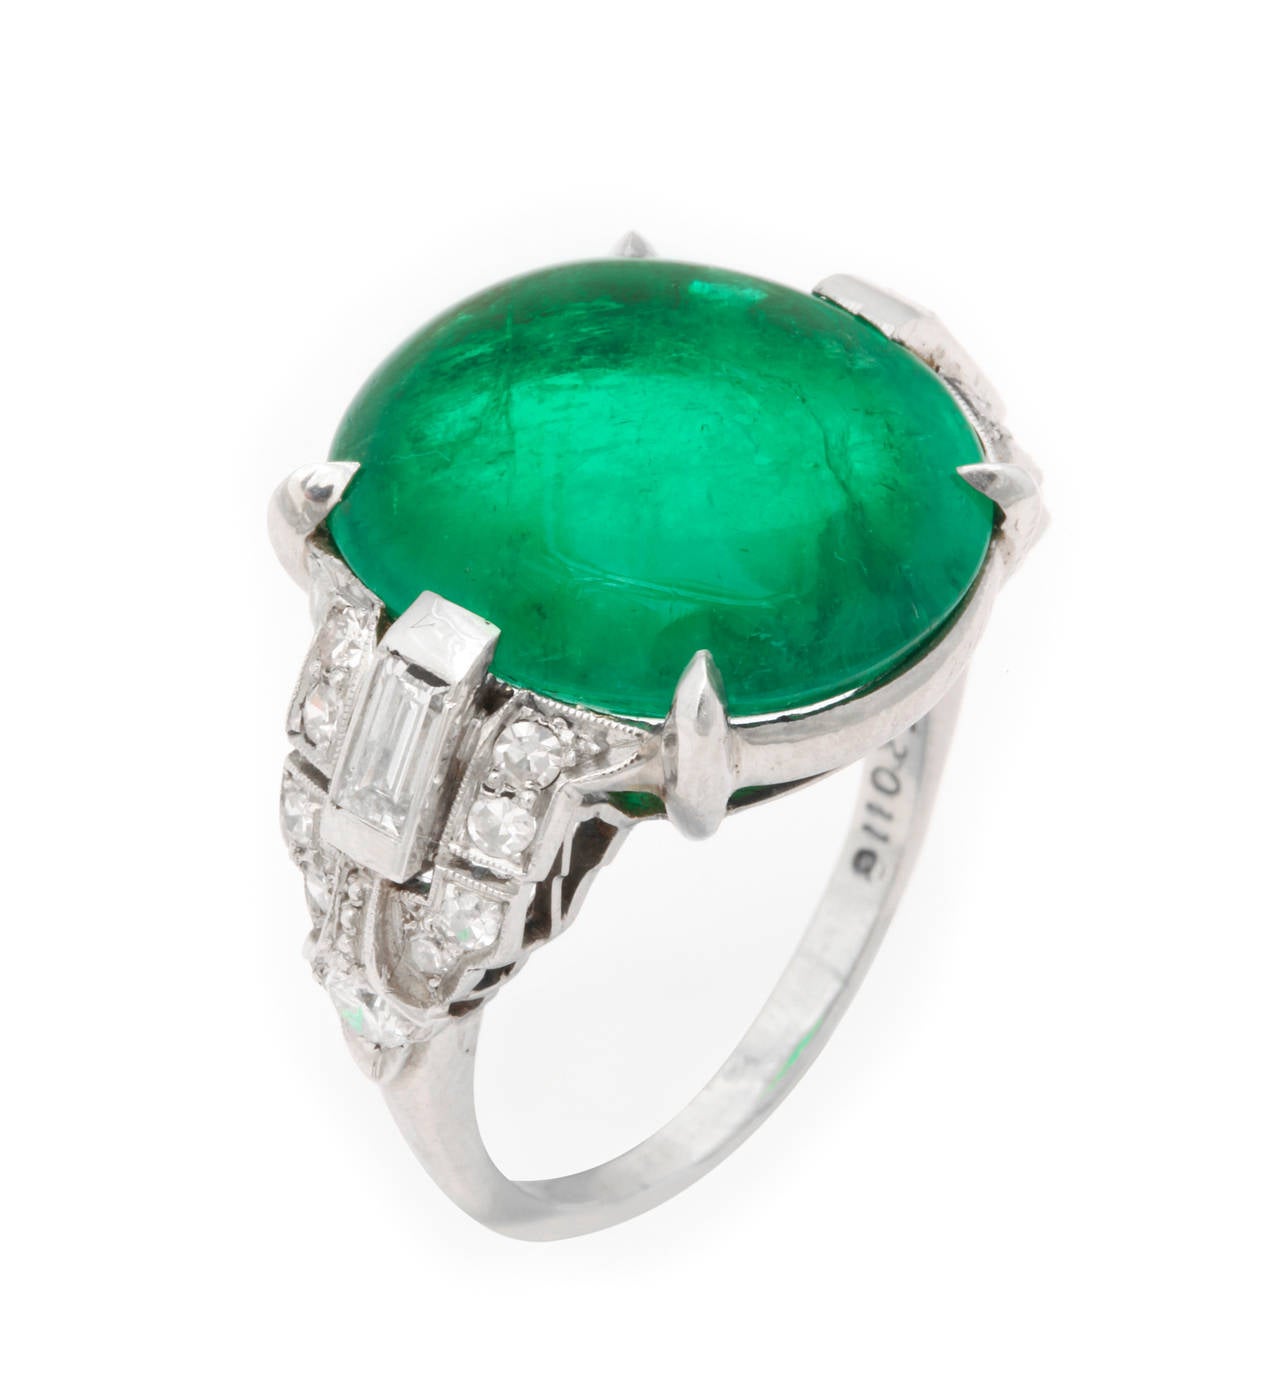 J.E. Caldwell Art Deco ring is set with a cabochon emerald, diamonds, and 18K white gold. 

Estimated diamond weight: 1.70ct

Estimated emerald weight: 15.70ct

Ring size: 9